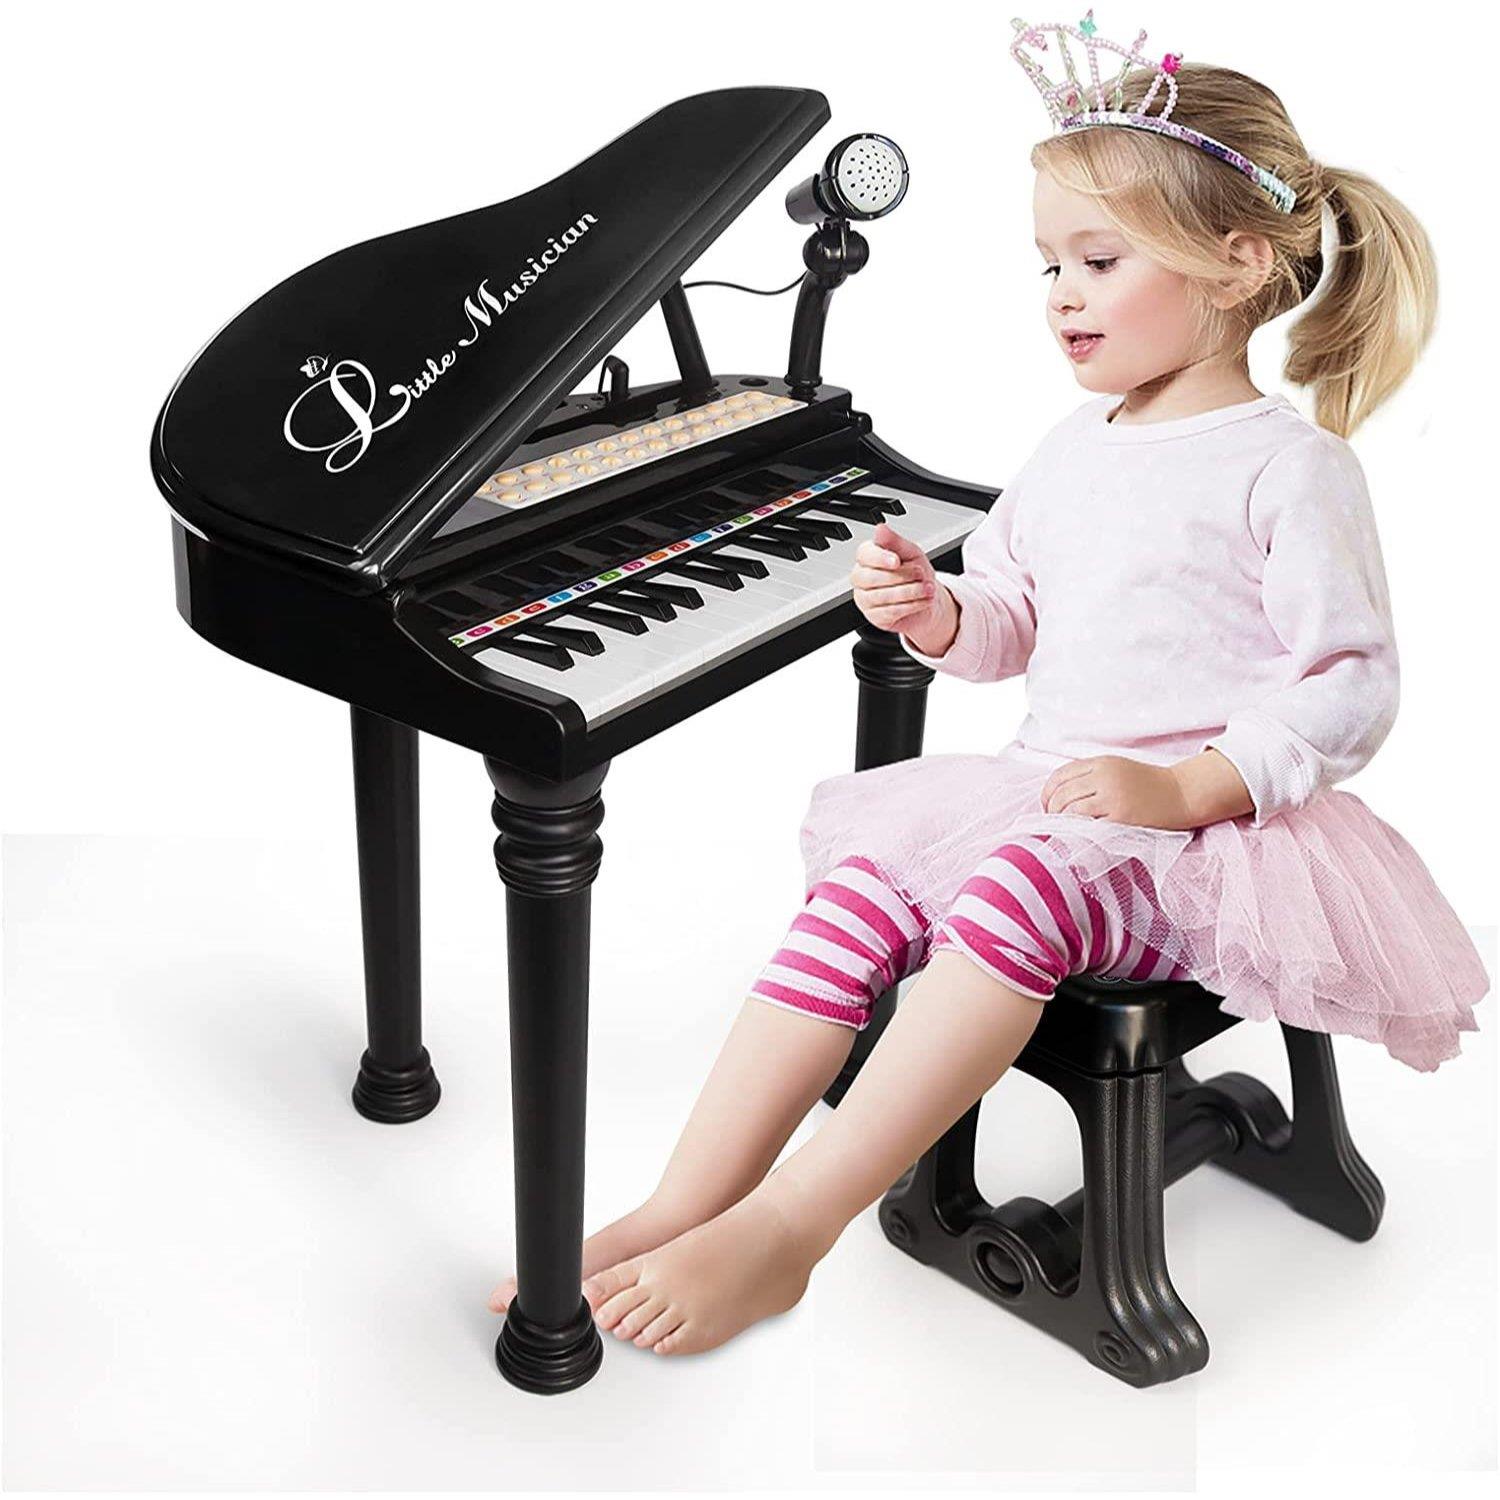 The Magic Toy Shop Black Electronic Piano With Microphone and Stool